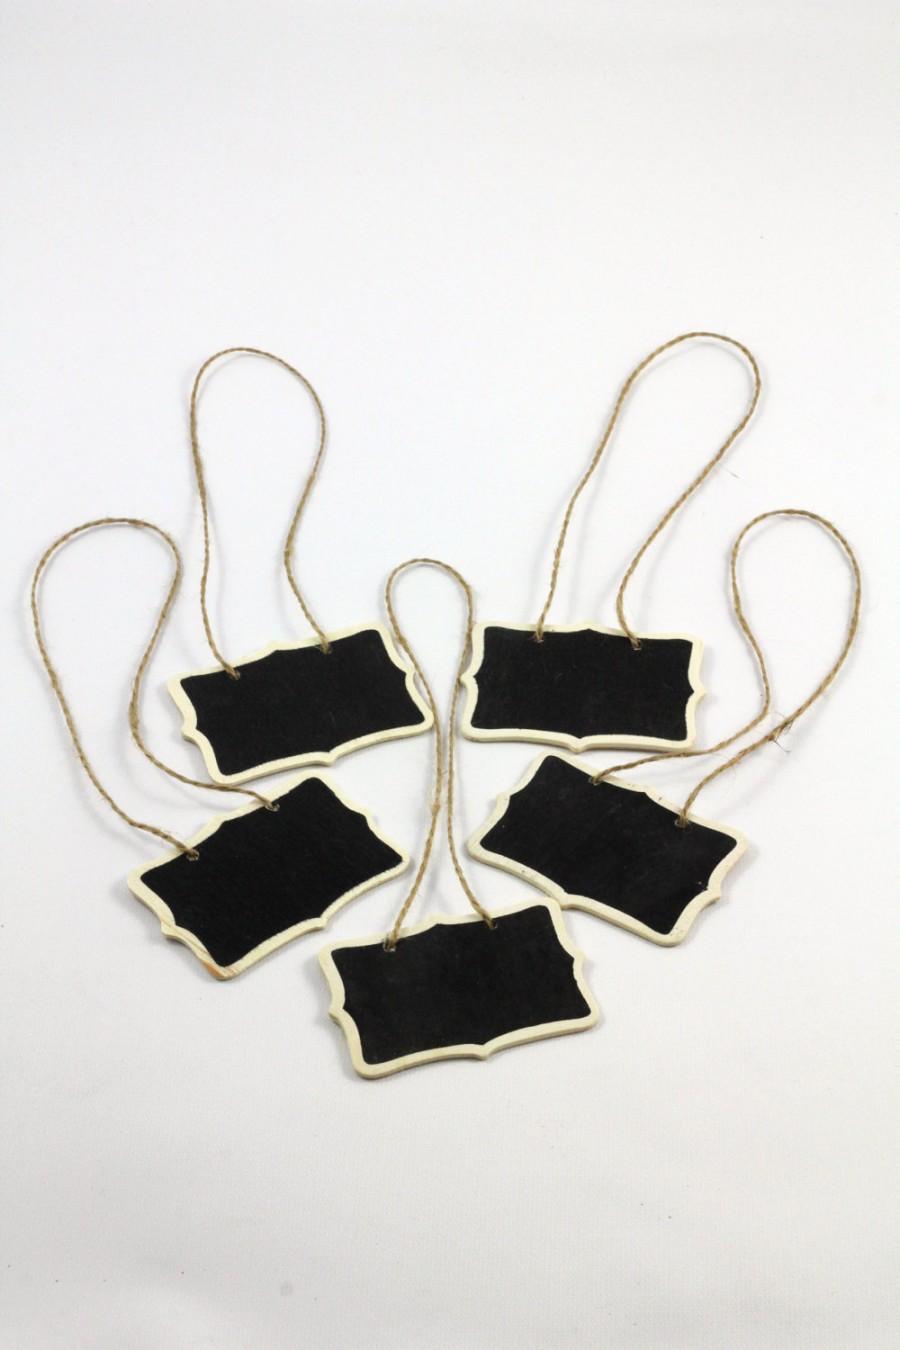 Свадьба - SALE - Set of 5  - Mini Chalkboard Hanging Tags - Cottage Chic - Package embellishment  - Gift Tags Favor Tags - DearSeed